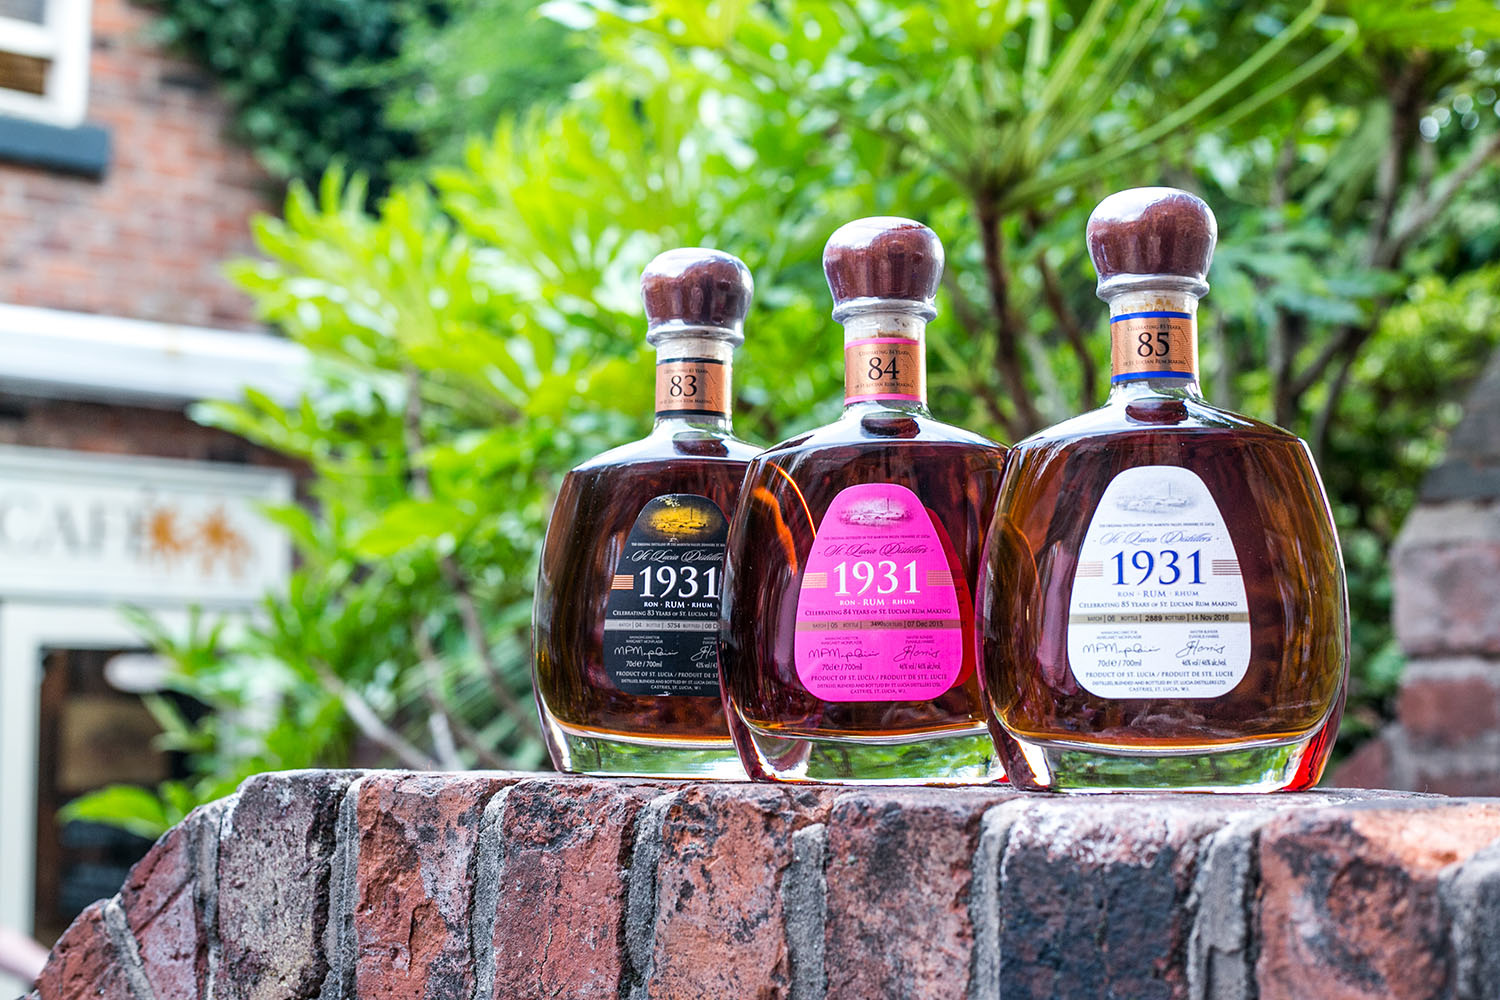 MARIGOT BAY BAR & CAFÉ LAUNCHES RUM INVENTORY ON NATIONAL RUM DAY